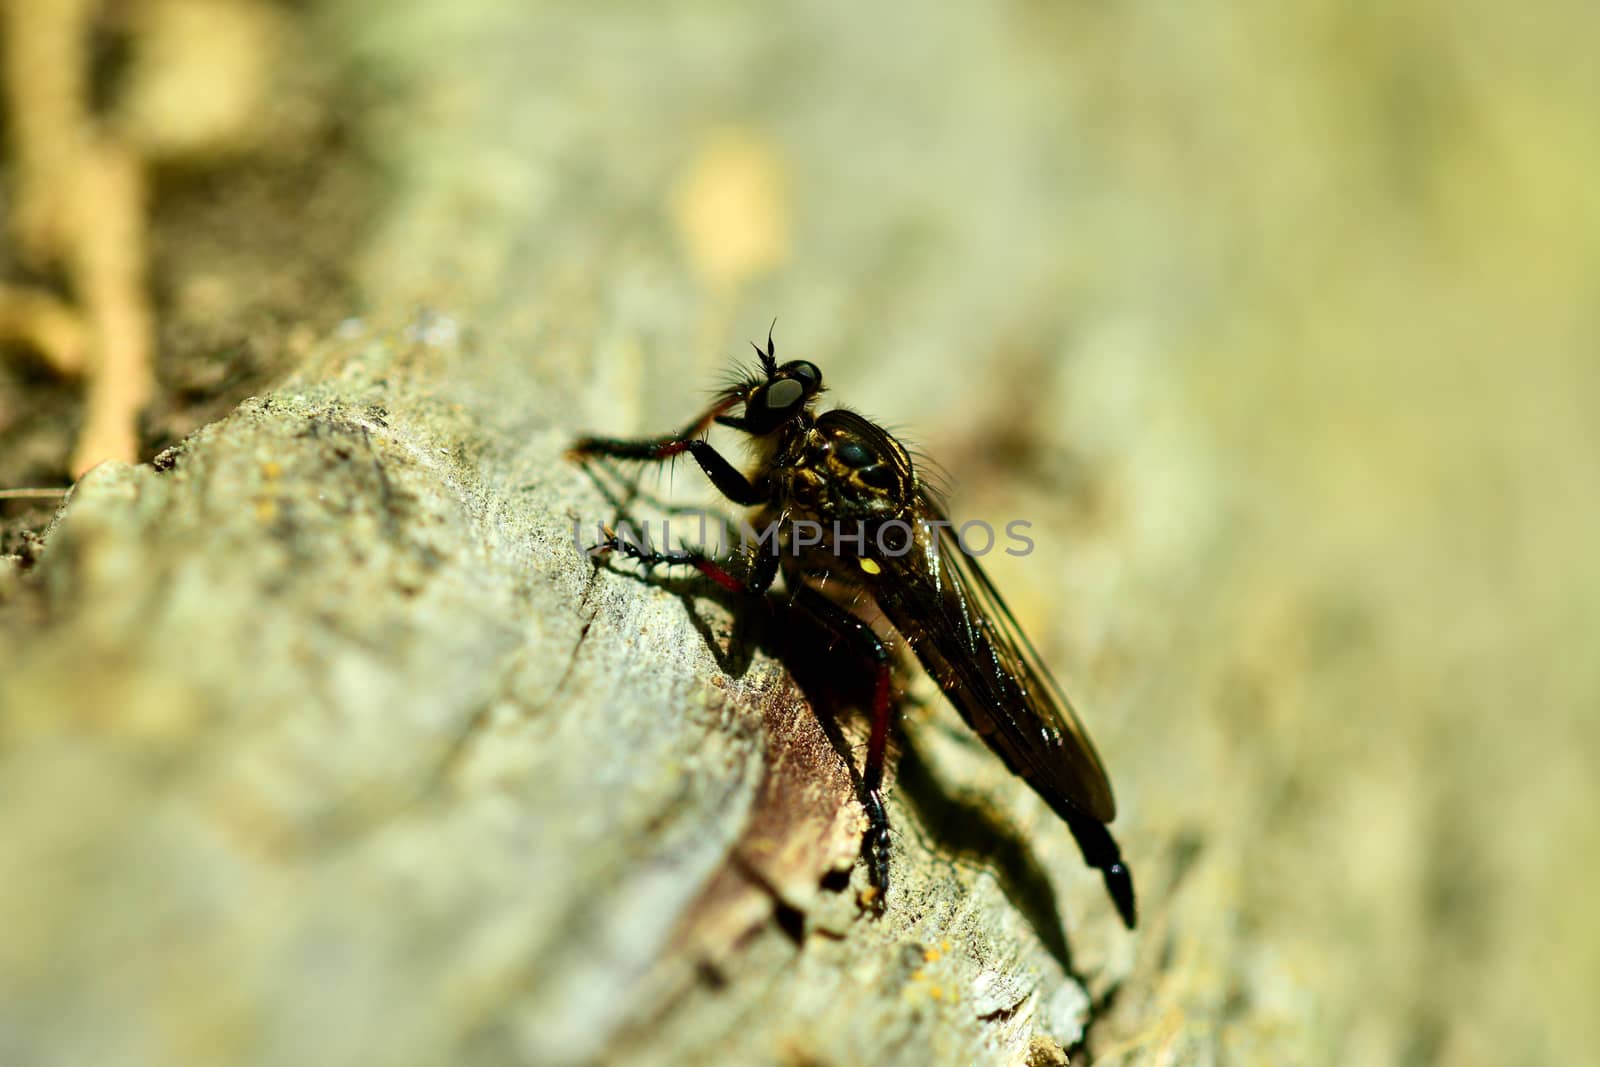 The name "robber flies" reflects their notoriously aggressive predatory habits; they feed mainly or exclusively on other insects and as a rule they wait in ambush and catch their prey in flight obtaining sufficient nourishment.